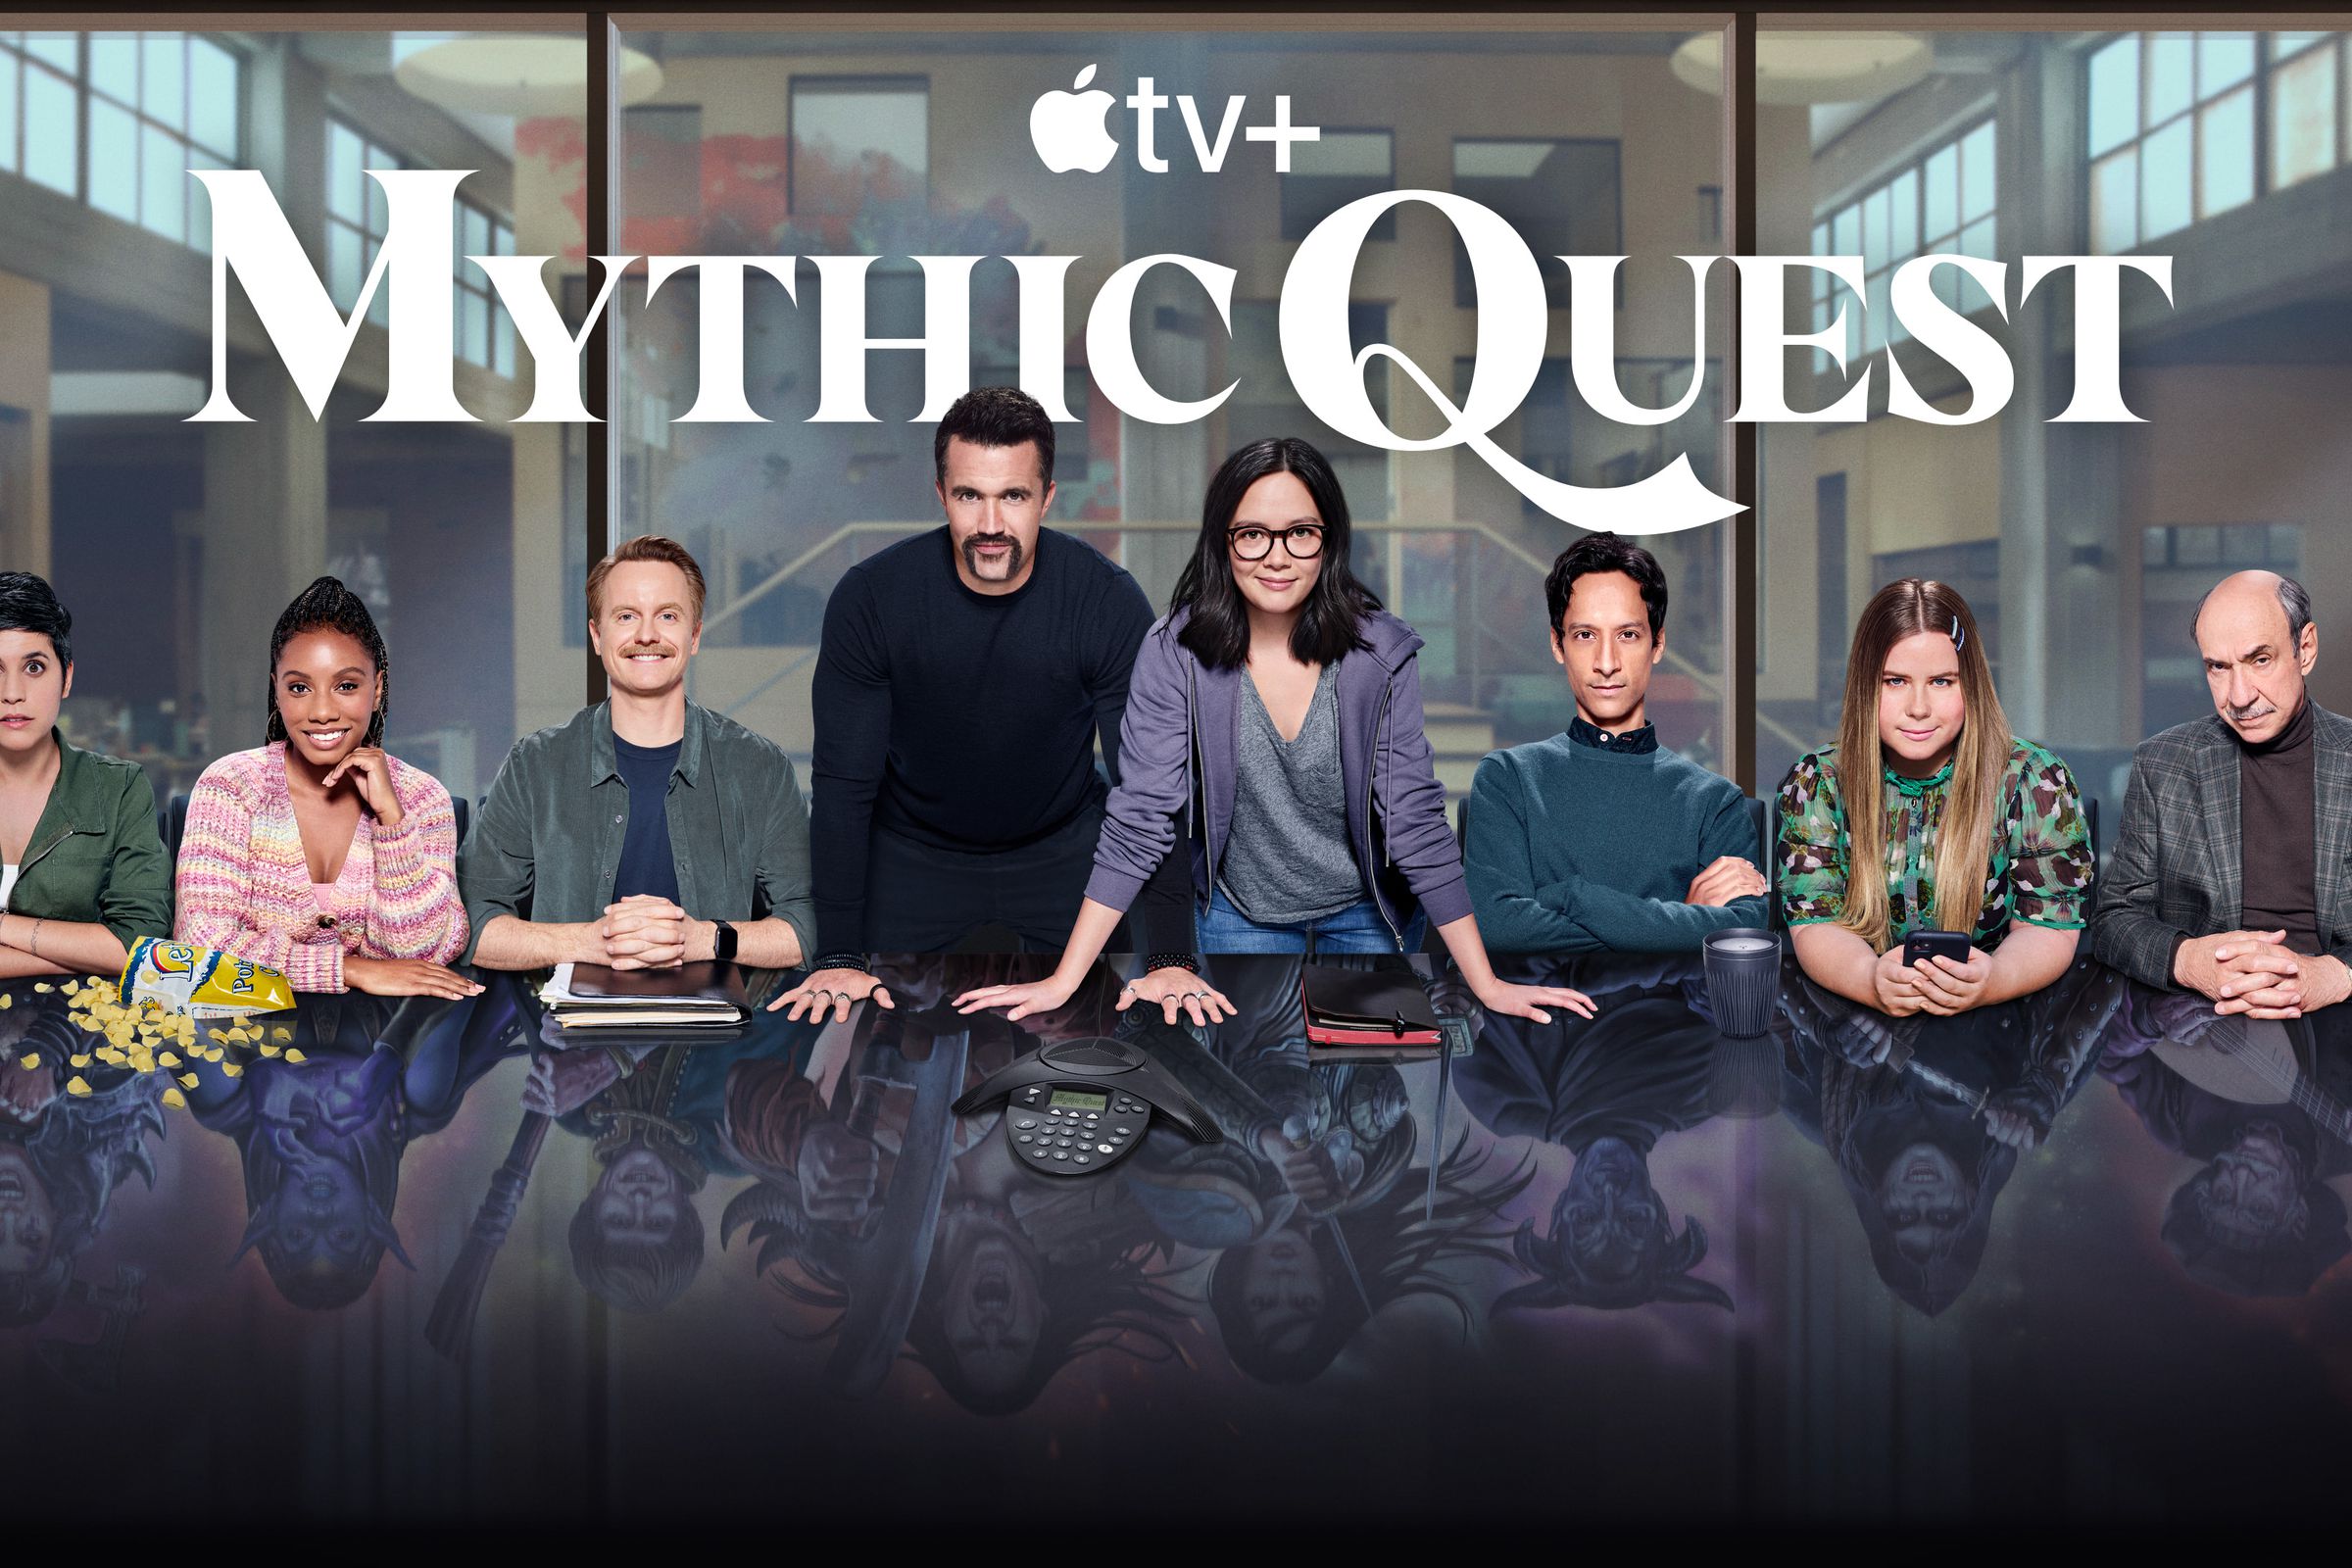 The cast of Mythic Quest.